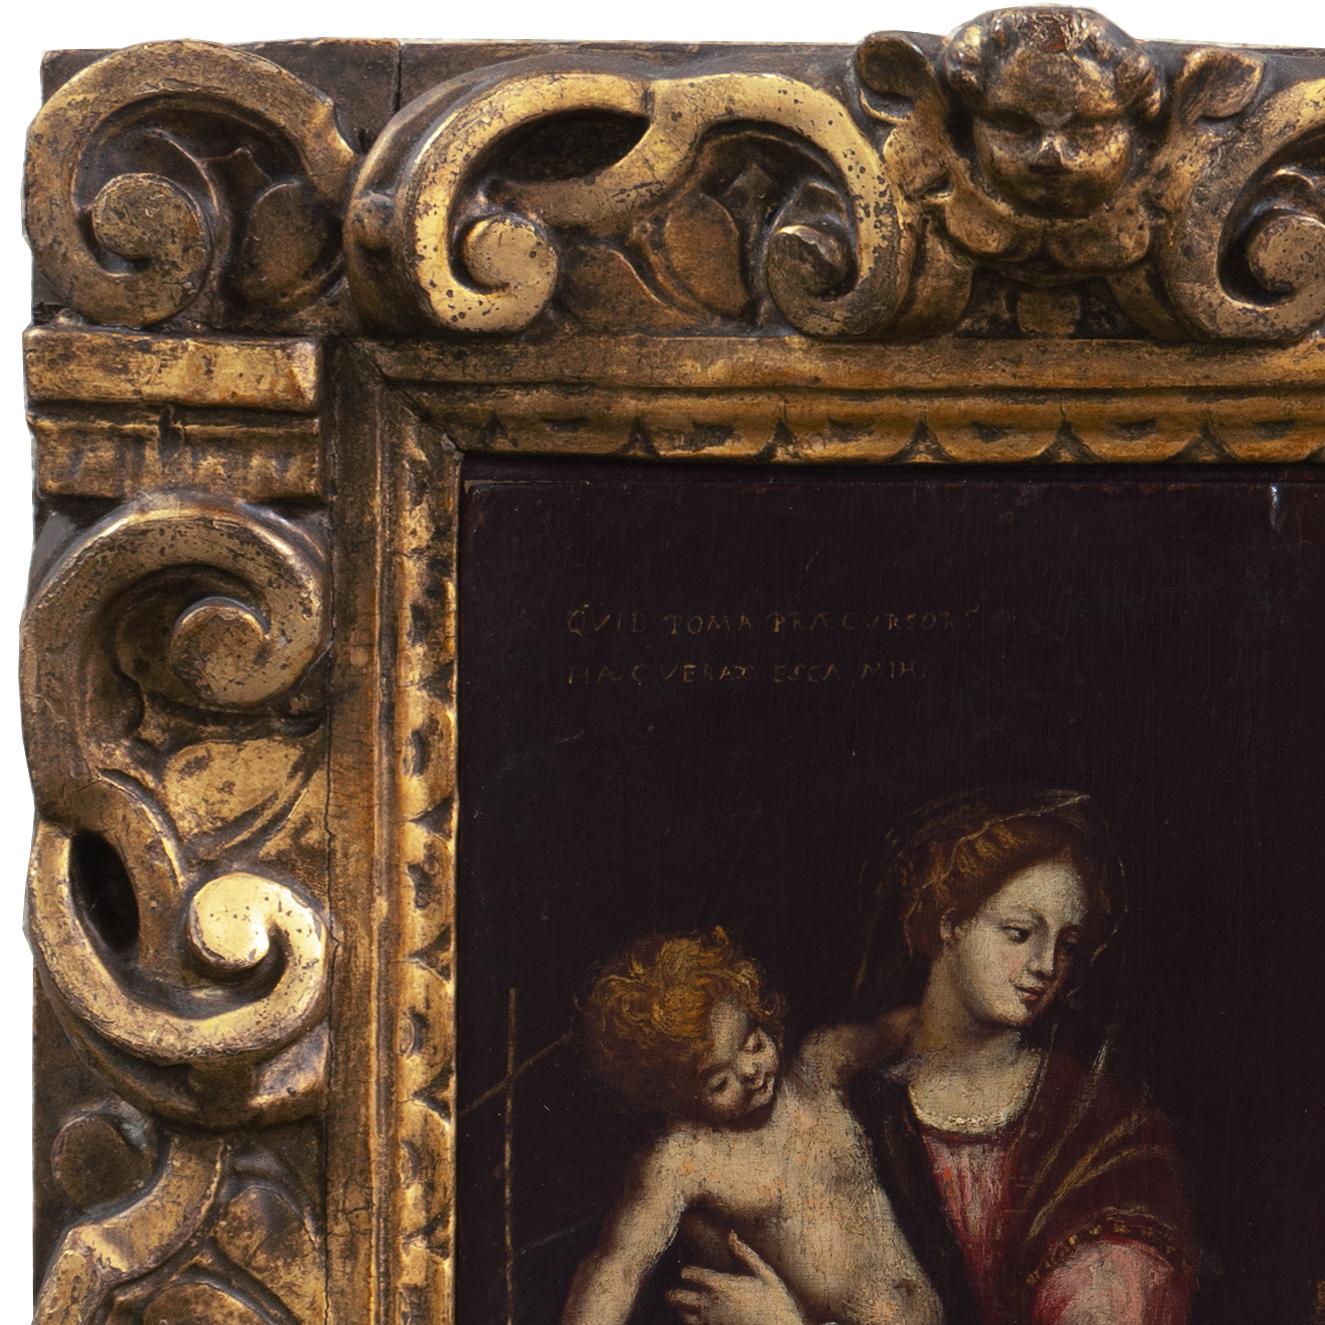 A late 17th century, devotional oil showing the Virgin Mary with Jesus and St. John the Baptist.  Displayed in a fine and period, hand-carved and gilt-wood frame.

The Virgin cradles the young Christ who holds St. John's long cross.  St. John,